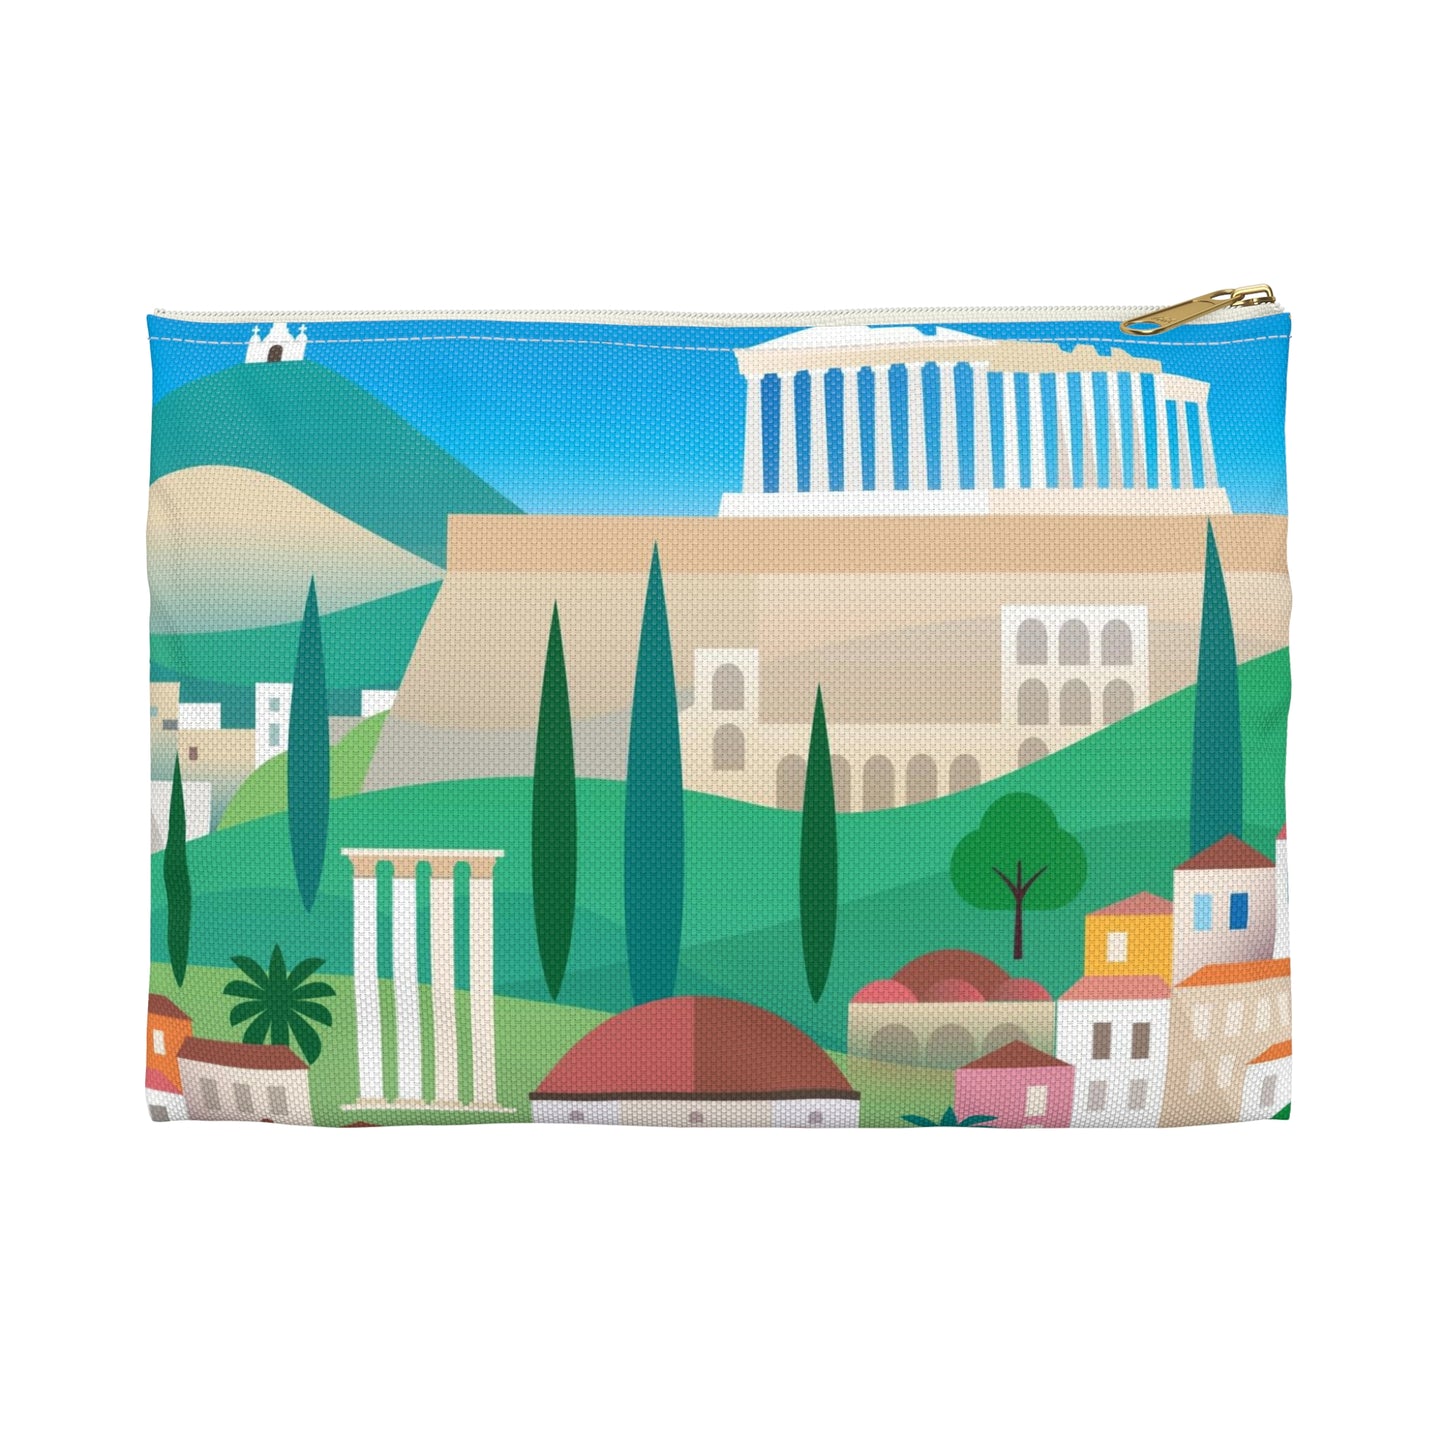 Athens Zip Pouch